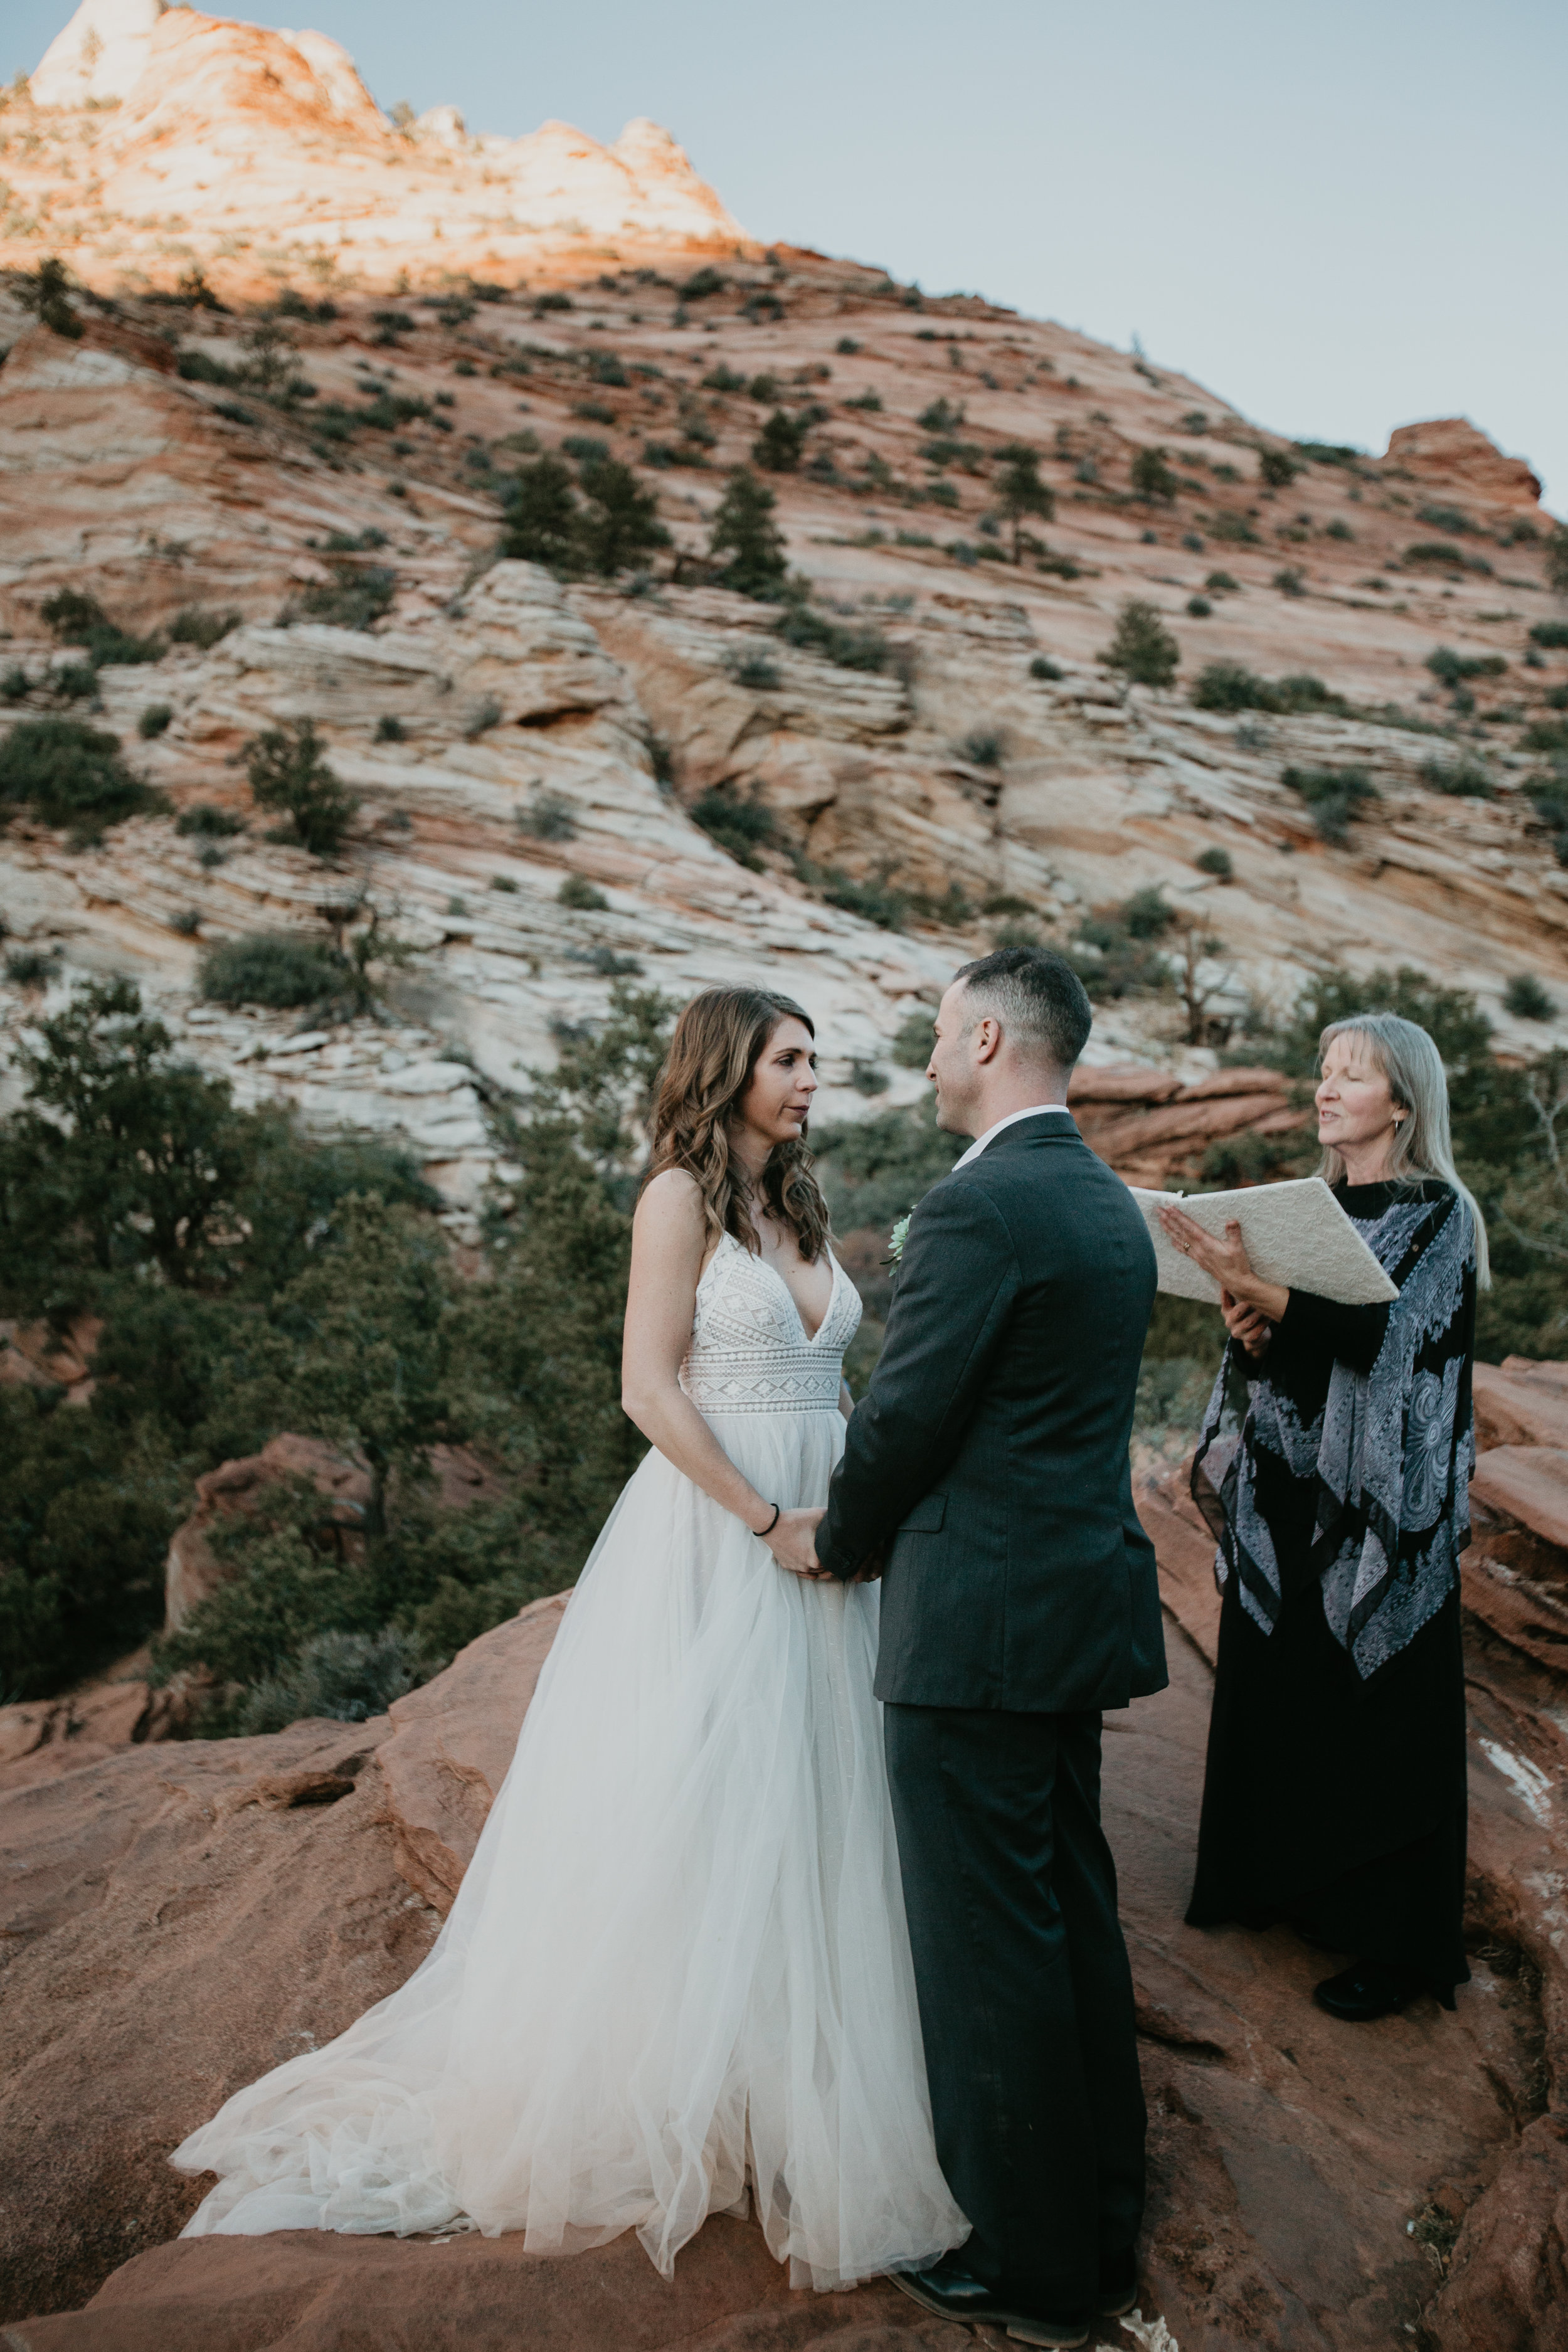 nicole-daacke-photography-zion-national-park-elopement-photographer-canyon-overlook-trail-elope-hiking-adventure-wedding-photos-fall-utah-red-rock-canyon-stgeorge-eloping-photographer-51.jpg